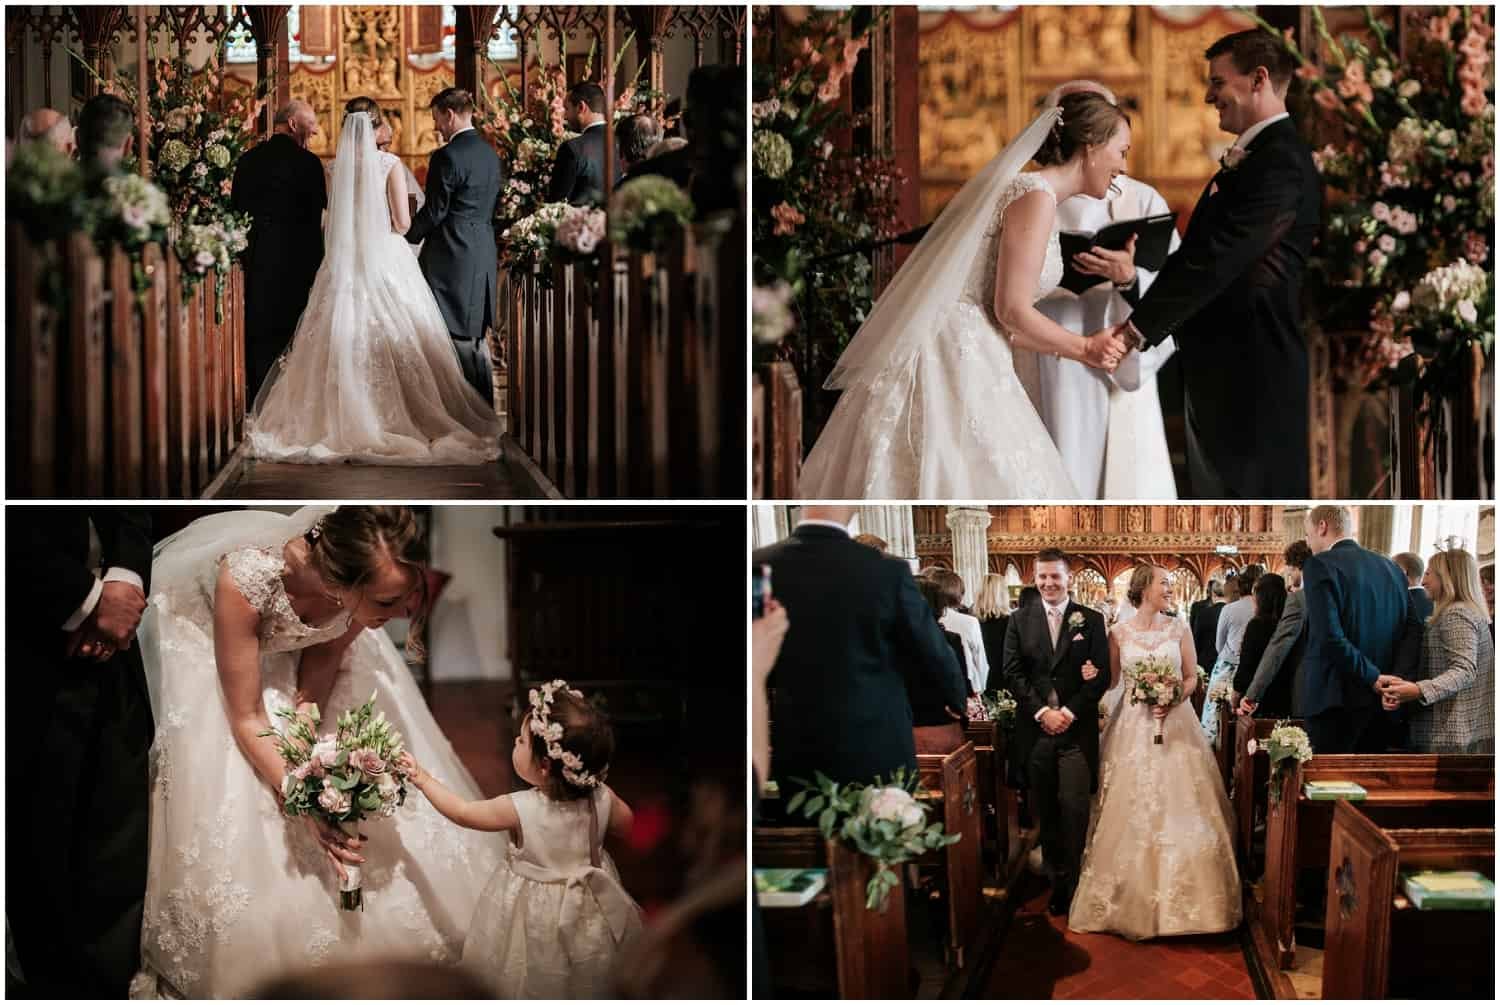 The wedding of Emma and Paul, photography by Christian Michael